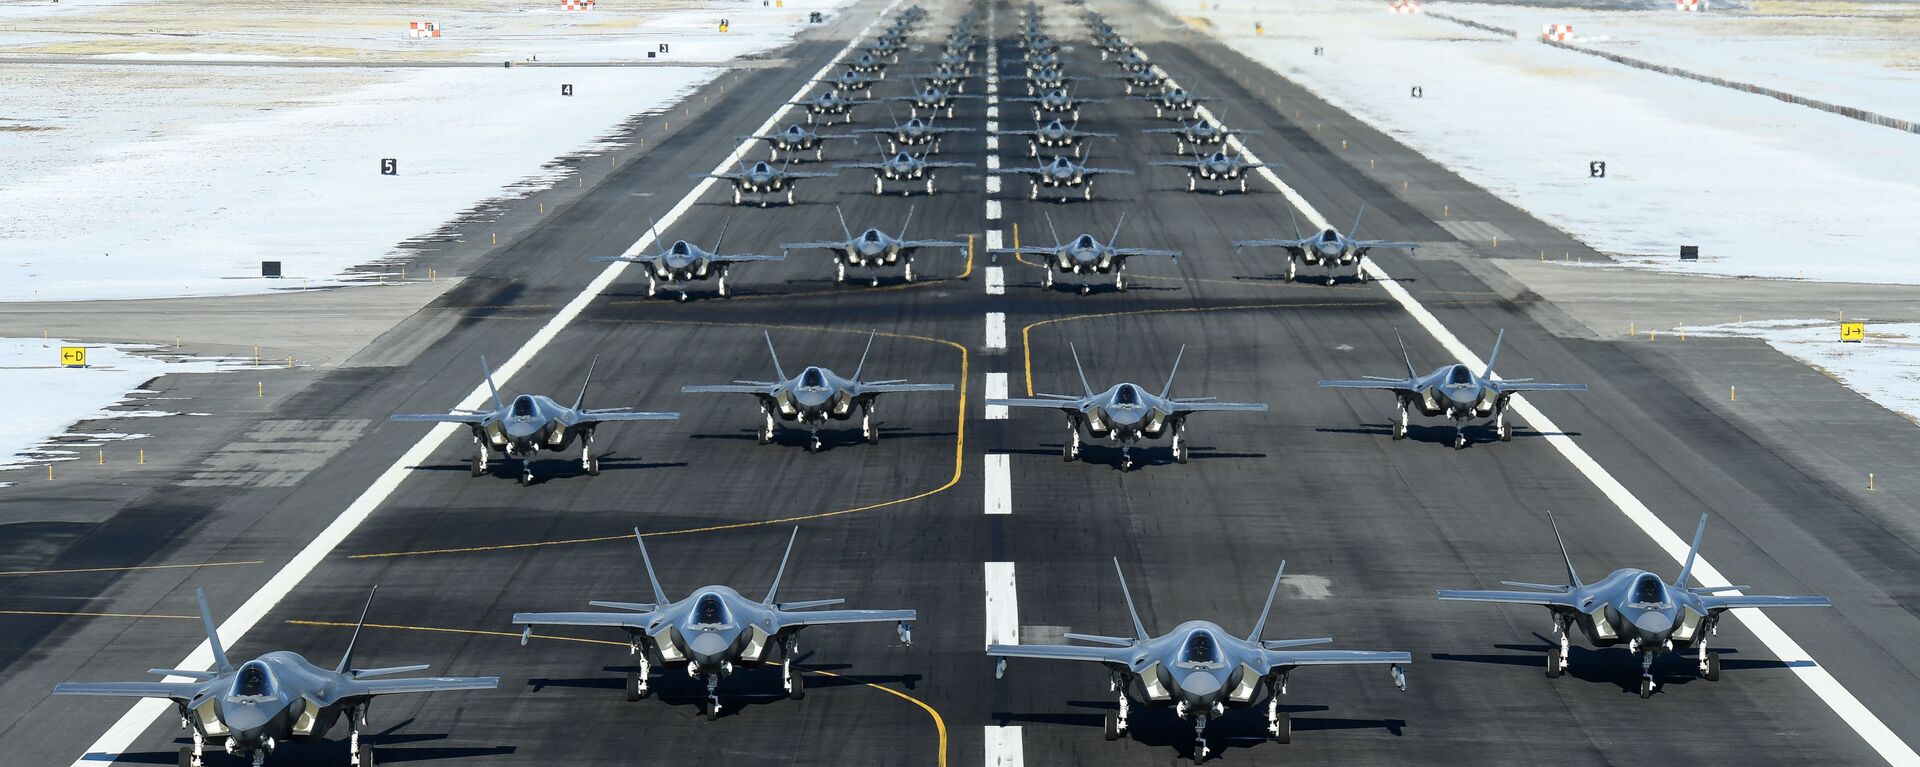 The active duty 388th and Reserve 419th Fighter Wings conducted an F-35A Combat Power Exercise at Hill Air Force Base, Utah, Jan. 6, 2020. - Sputnik International, 1920, 10.03.2023